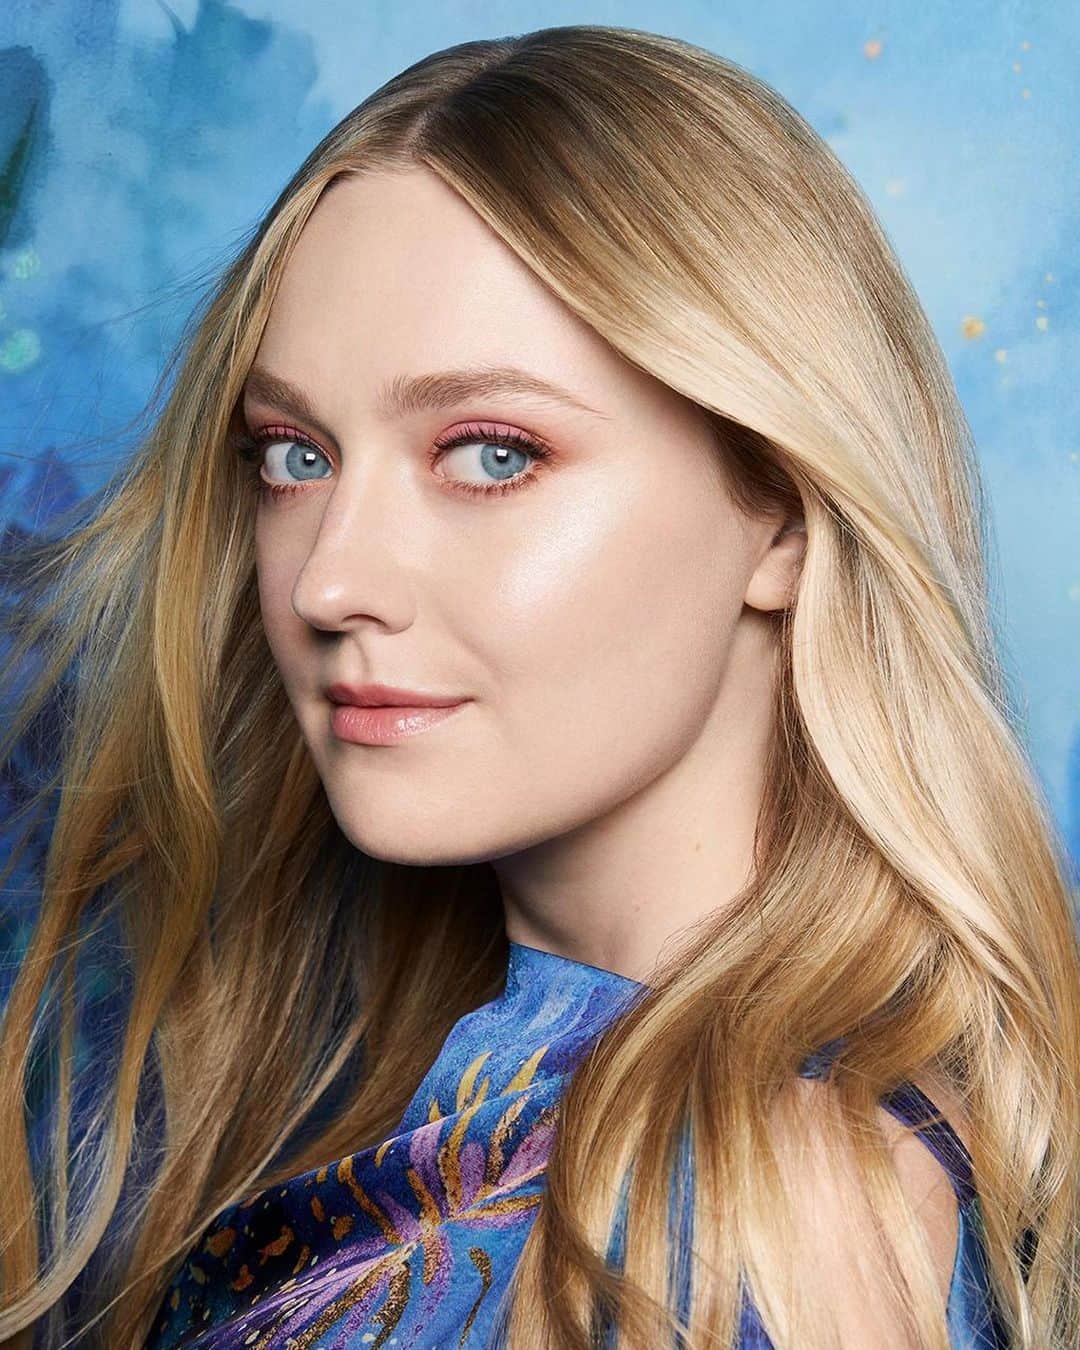 Clé de Peau Beauté Officialのインスタグラム：「Our 2023 Holiday Collection–“Toward the Horizon– is a masterpiece designed by the incredibly talented @KatieRodgers, who was inspired by the enchanting beauty of the underwater world.   This limited edition series features your favorite CPB products, with Katie’s intricate, dreamlike illustrations lovingly woven into every aspect of the collection. Whether you get it as a gift for a special someone –or for yourself–you know each set is a celebration of beauty, art and love ❤️   クレ・ド・ポー ボーテ 2023 ホリデーコレクション 「Toward the Horizon」～さらに先へ、輝く未来を信じて～ は、ケイティ ロジャース氏（@KatieRodgers）が童話「人魚姫」にインスパイアされてつくられたコレクションです。 今回のコレクションは、あなたのお気に入りのクレ・ド・ポー ボーテのアイテムのパッケージに、ケイティ ロジャース氏の繊細さと大胆さを併せ持つ、強くエレガントなアートワーク、そしてその大胆なブラシのタッチと豊かな色彩が描き出されています。 自分へのご褒美として、どのアイテムも美と芸術が融合したコレクションであることを実感していただけることでしょう❤️」